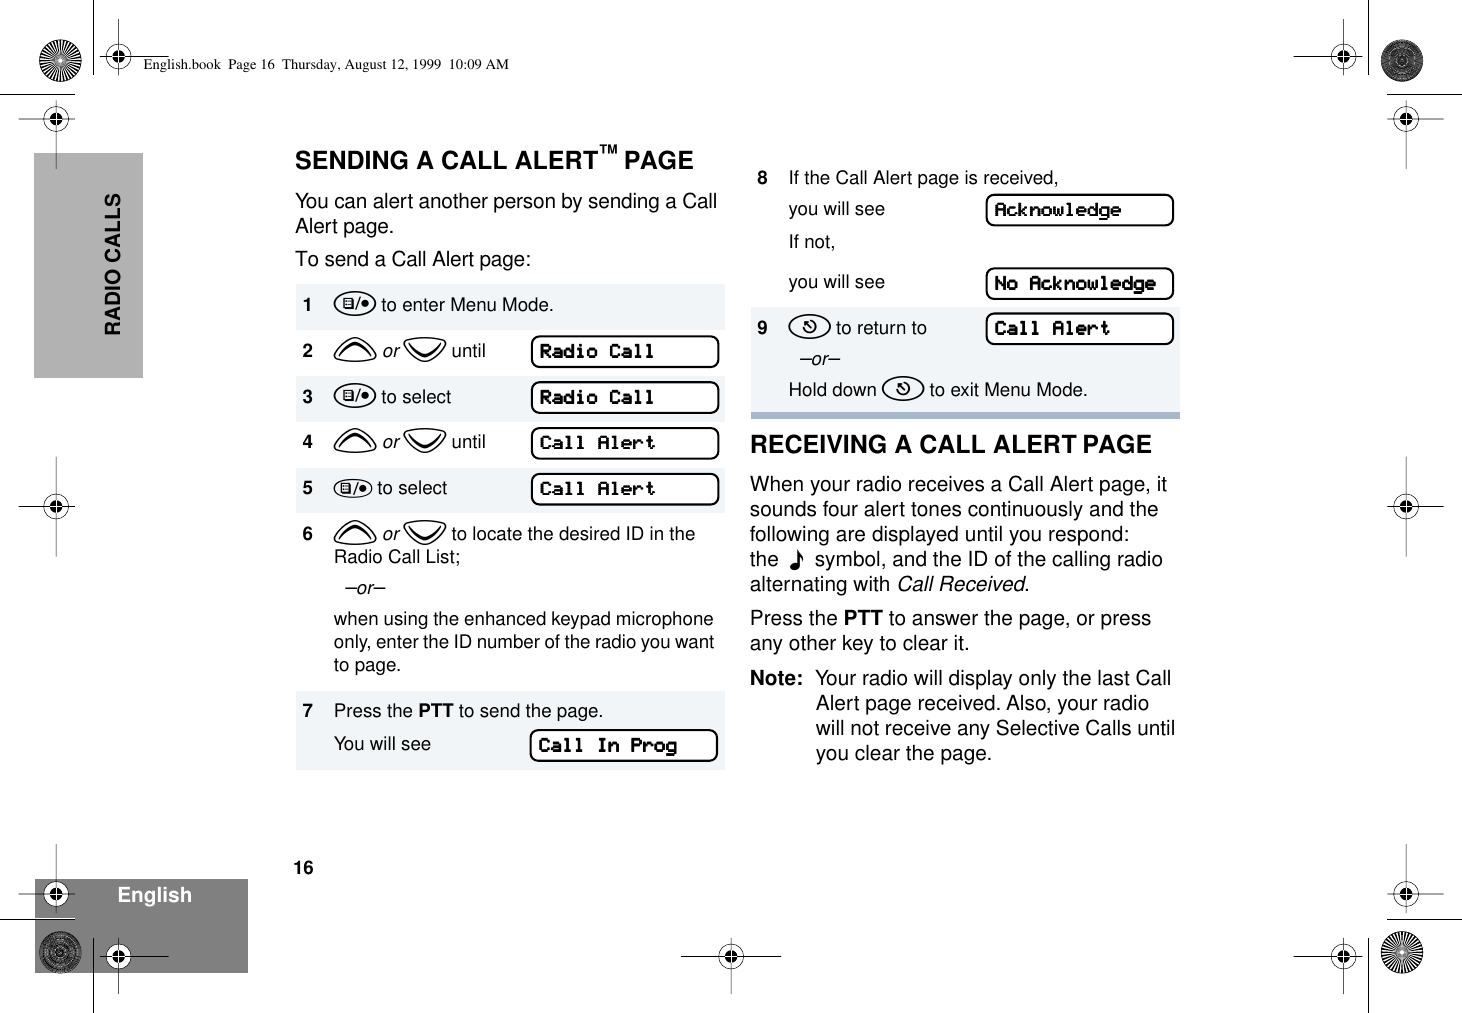 16EnglishRADIO CALLSSENDING A CALL ALERT™ PAGEYou can alert another person by sending a Call Alert page.To send a Call Alert page:RECEIVING A CALL ALERT PAGEWhen your radio receives a Call Alert page, it sounds four alert tones continuously and the following are displayed until you respond: the  F  symbol, and the ID of the calling radio alternating with Call Received.Press the PTT to answer the page, or press any other key to clear it.Note: Your radio will display only the last Call Alert page received. Also, your radio will not receive any Selective Calls until you clear the page.1u to enter Menu Mode.2y or z until3u to select4y or z until5) to select6y or z to locate the desired ID in the Radio Call List;  –or–when using the enhanced keypad microphone only, enter the ID number of the radio you want to page.7Press the PTT to send the page.You will seeRRRRaaaaddddiiiioooo    CCCCaaaallllllllRRRRaaaaddddiiiioooo    CCCCaaaallllllllCCCCaaaallllllll    AAAAlllleeeerrrrttttCCCCaaaallllllll    AAAAlllleeeerrrrttttCCCCaaaallllllll    IIIInnnn    PPPPrrrroooogggg8If the Call Alert page is received, you will seeIf not,you will see9t to return to  –or–Hold down t to exit Menu Mode.AAAAcccckkkknnnnoooowwwwlllleeeeddddggggeeeeNNNNoooo    AAAAcccckkkknnnnoooowwwwlllleeeeddddggggeeeeCCCCaaaallllllll    AAAAlllleeeerrrrttttEnglish.book  Page 16  Thursday, August 12, 1999  10:09 AM